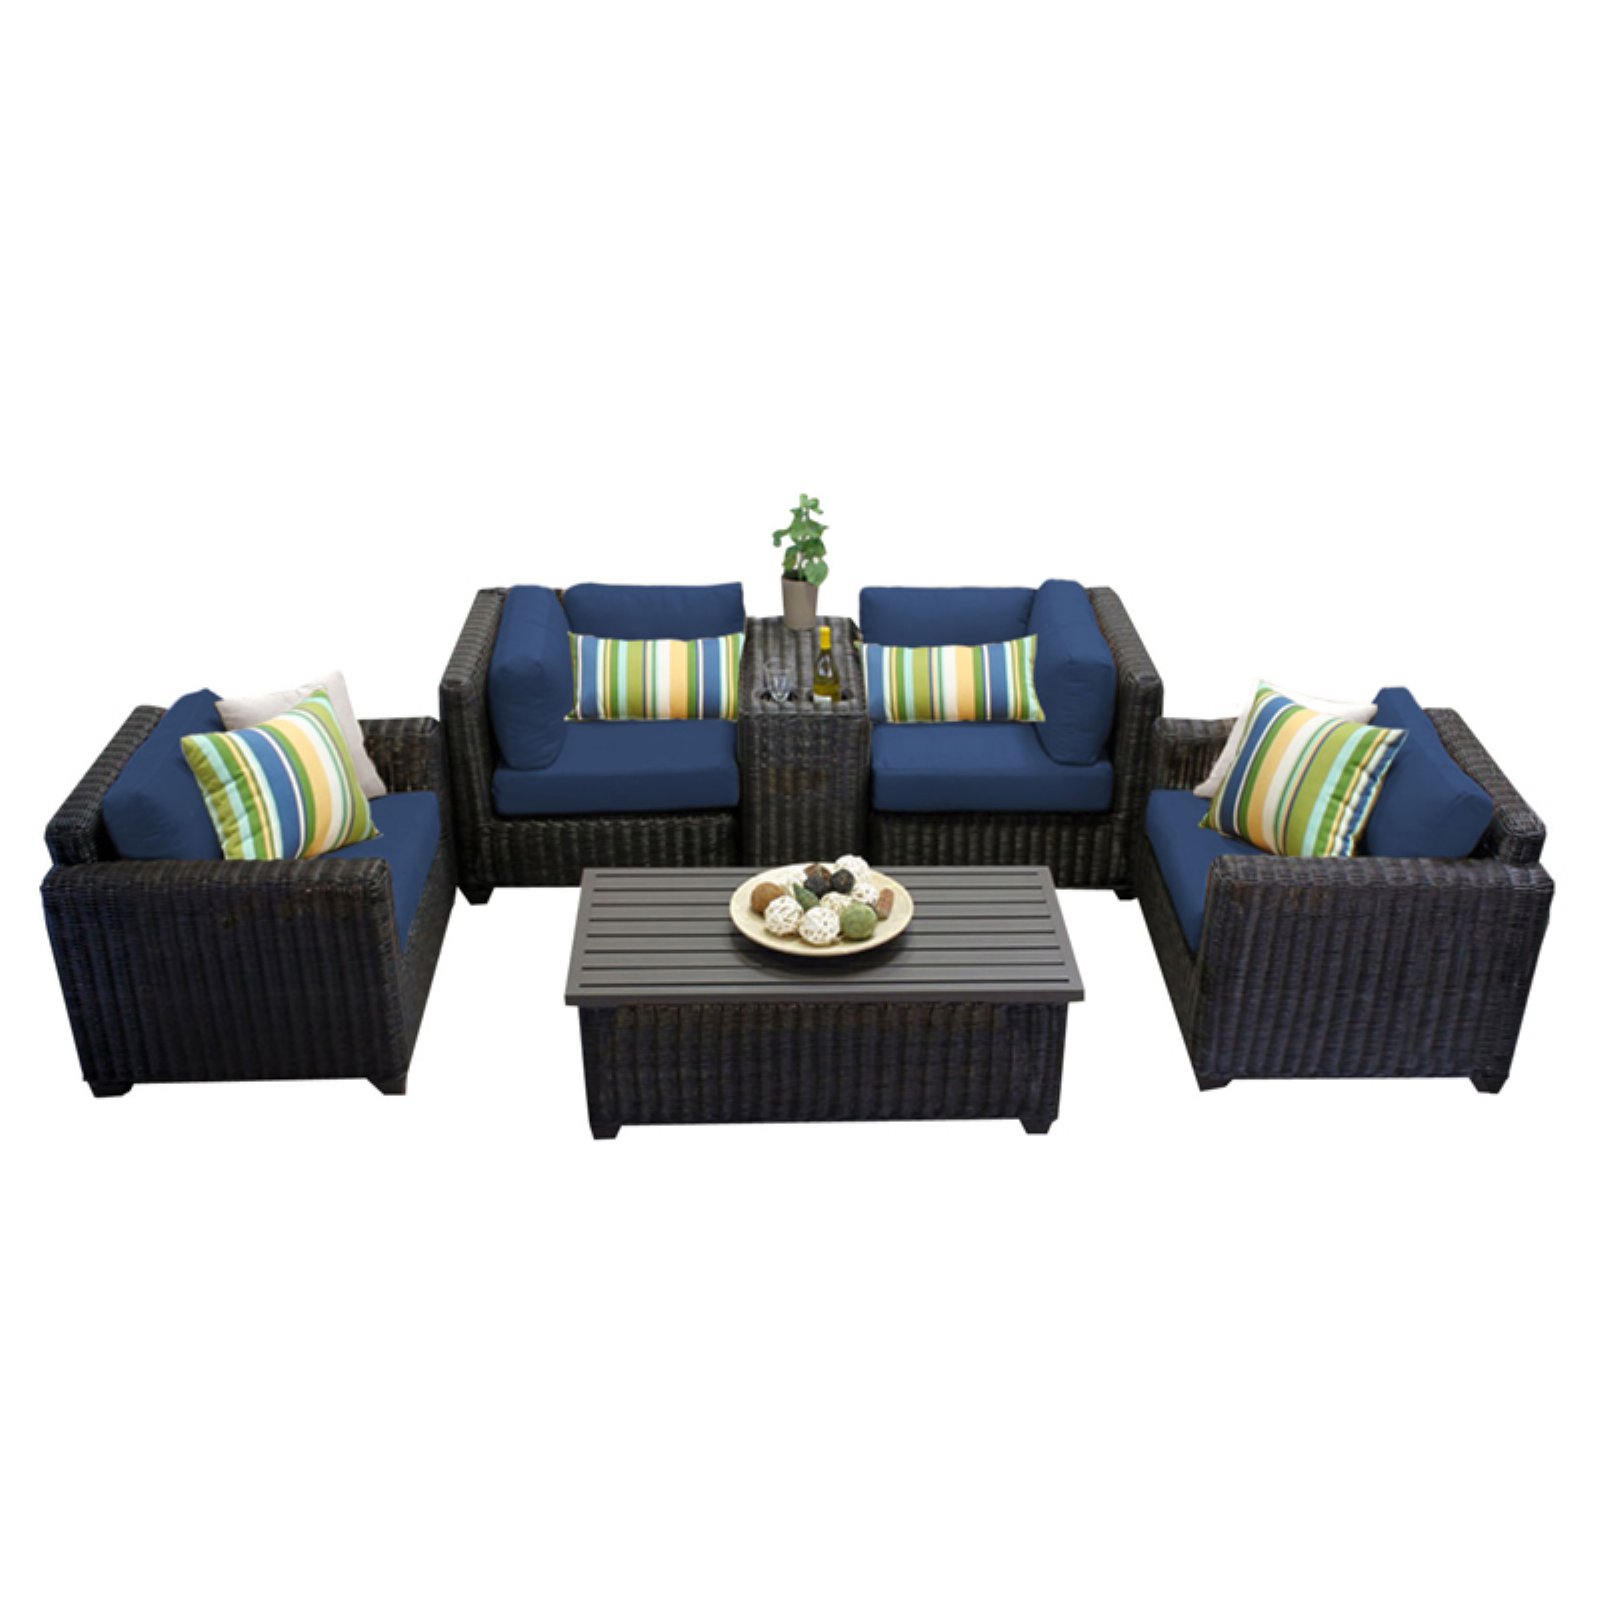 TK Classics Venice Wicker 6 Piece Patio Conversation Set with Coffee Table and 2 Sets of Cushion Covers - image 1 of 3